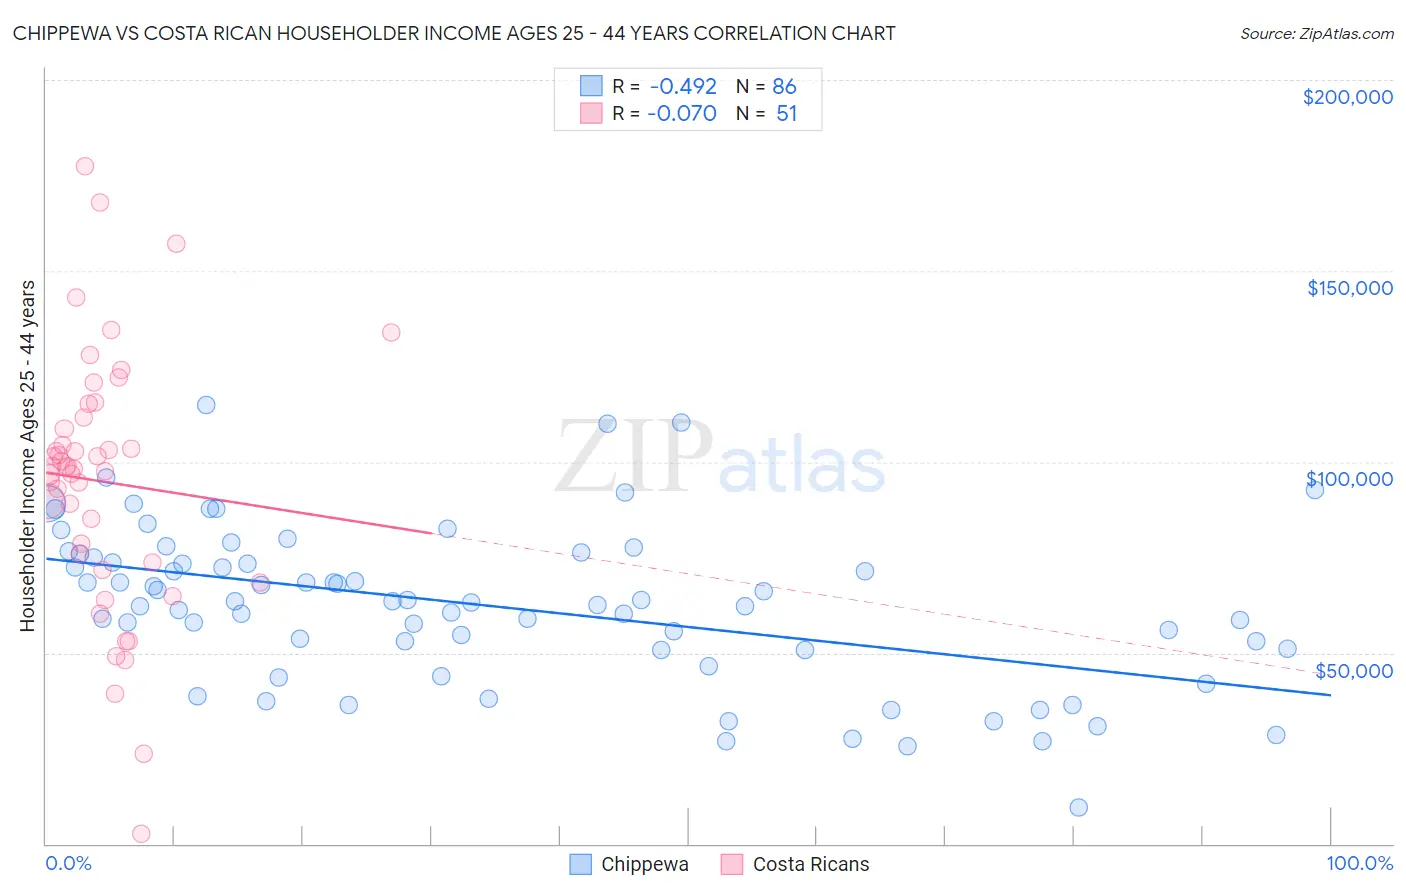 Chippewa vs Costa Rican Householder Income Ages 25 - 44 years